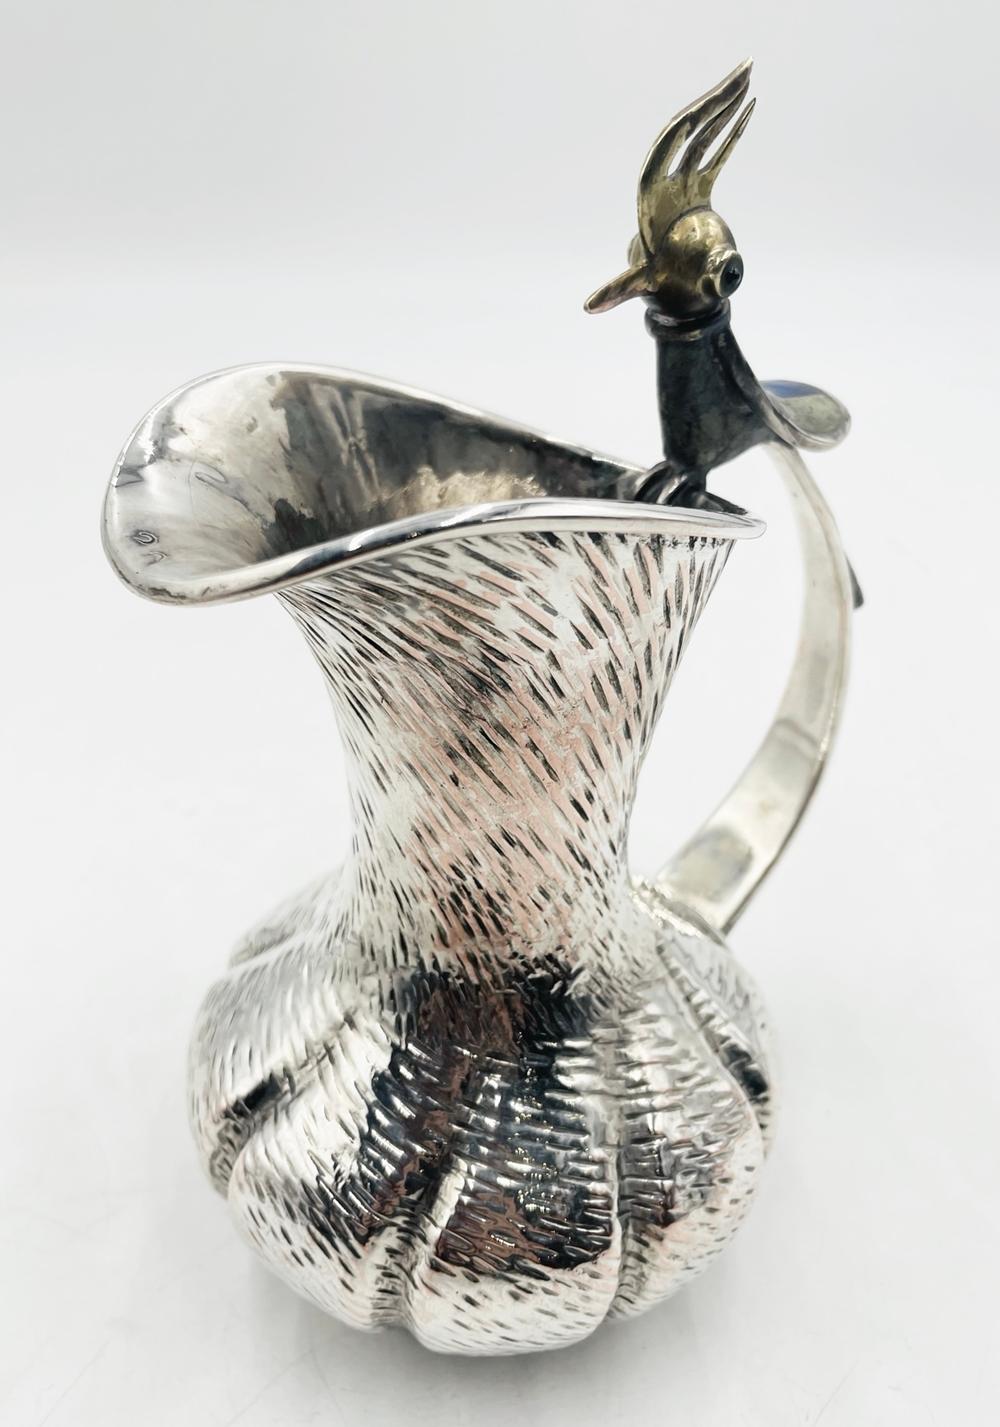 Hand-Crafted Silver Plated, Malachite & Lapis Lazuli Pitcher by Los Castillo, Mexico 1970's For Sale